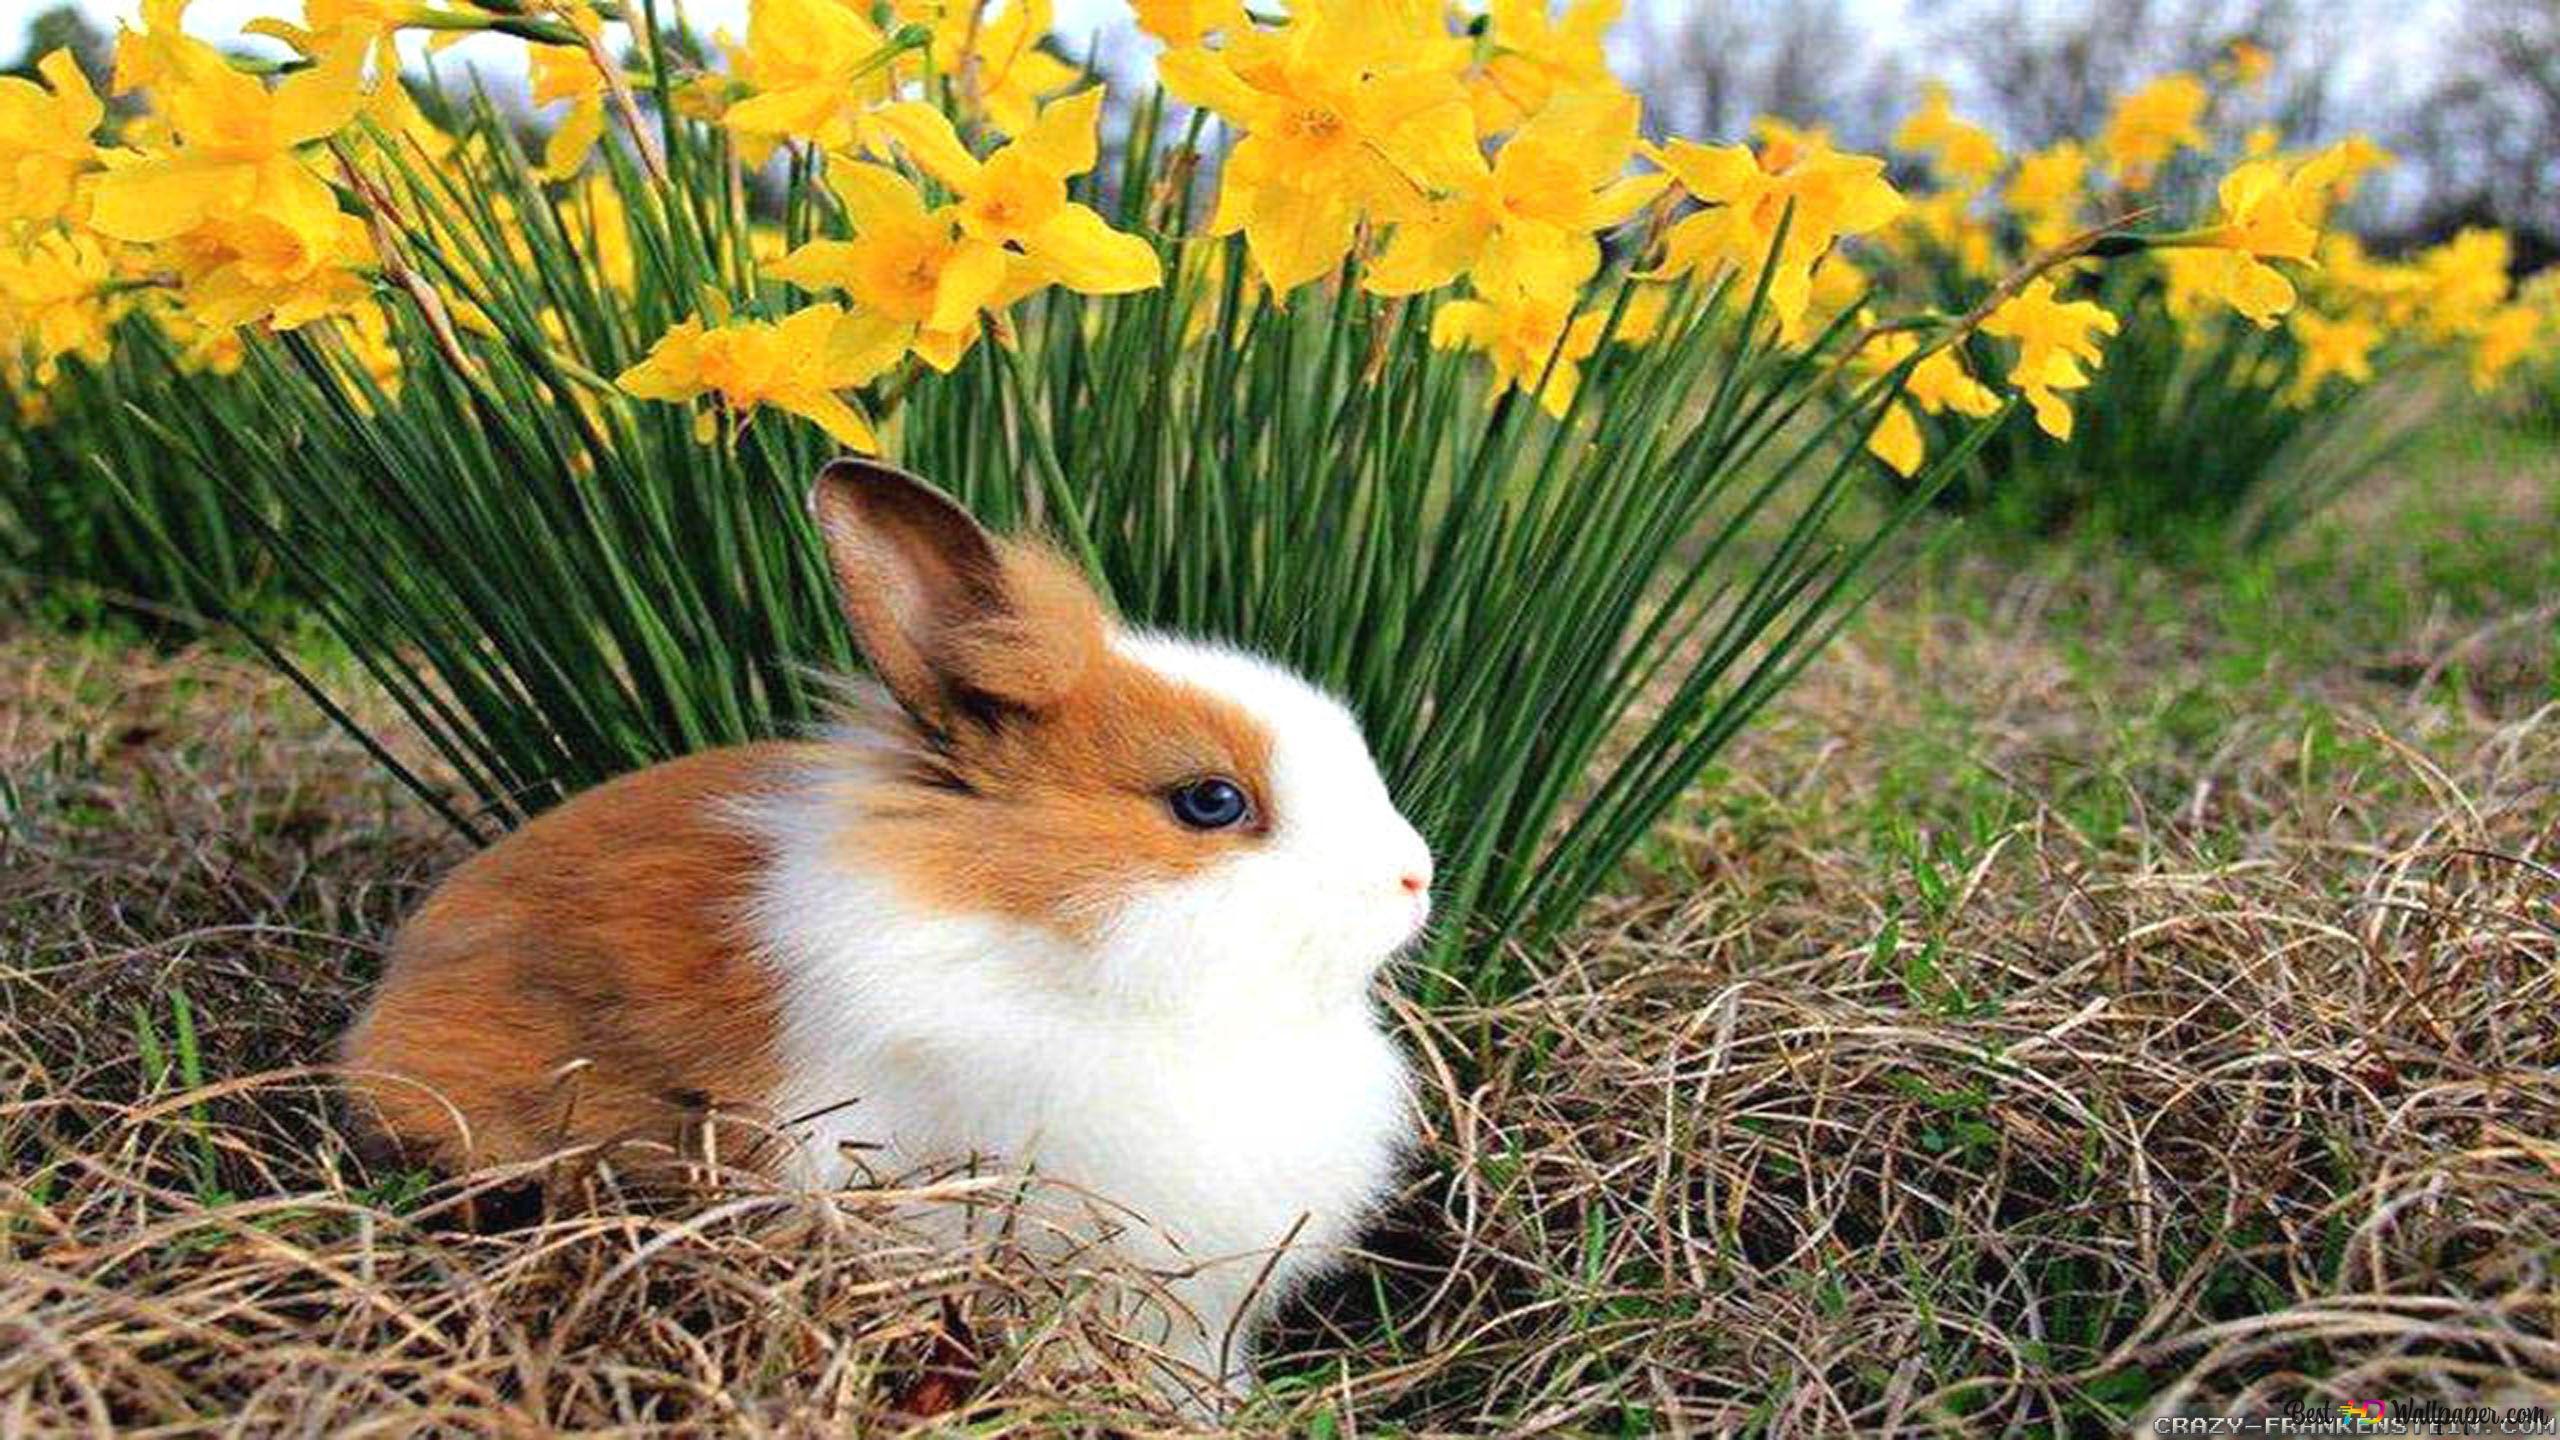 Rabbit celebrating spring among yellow flowers and withered grass 2K wallpaper download